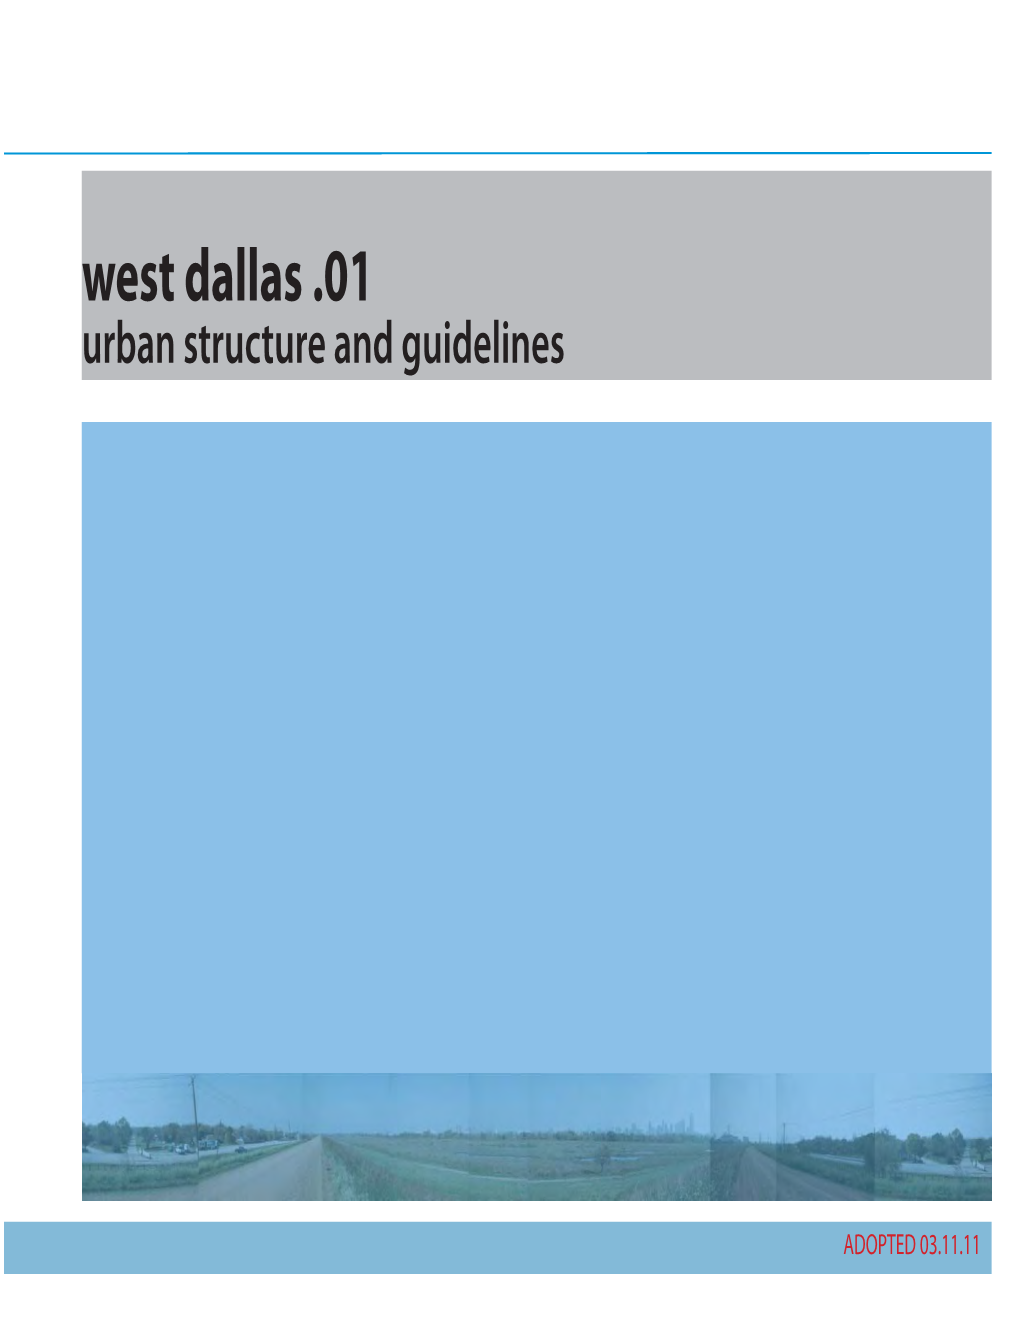 West Dallas .01 Urban Structure and Guidelines